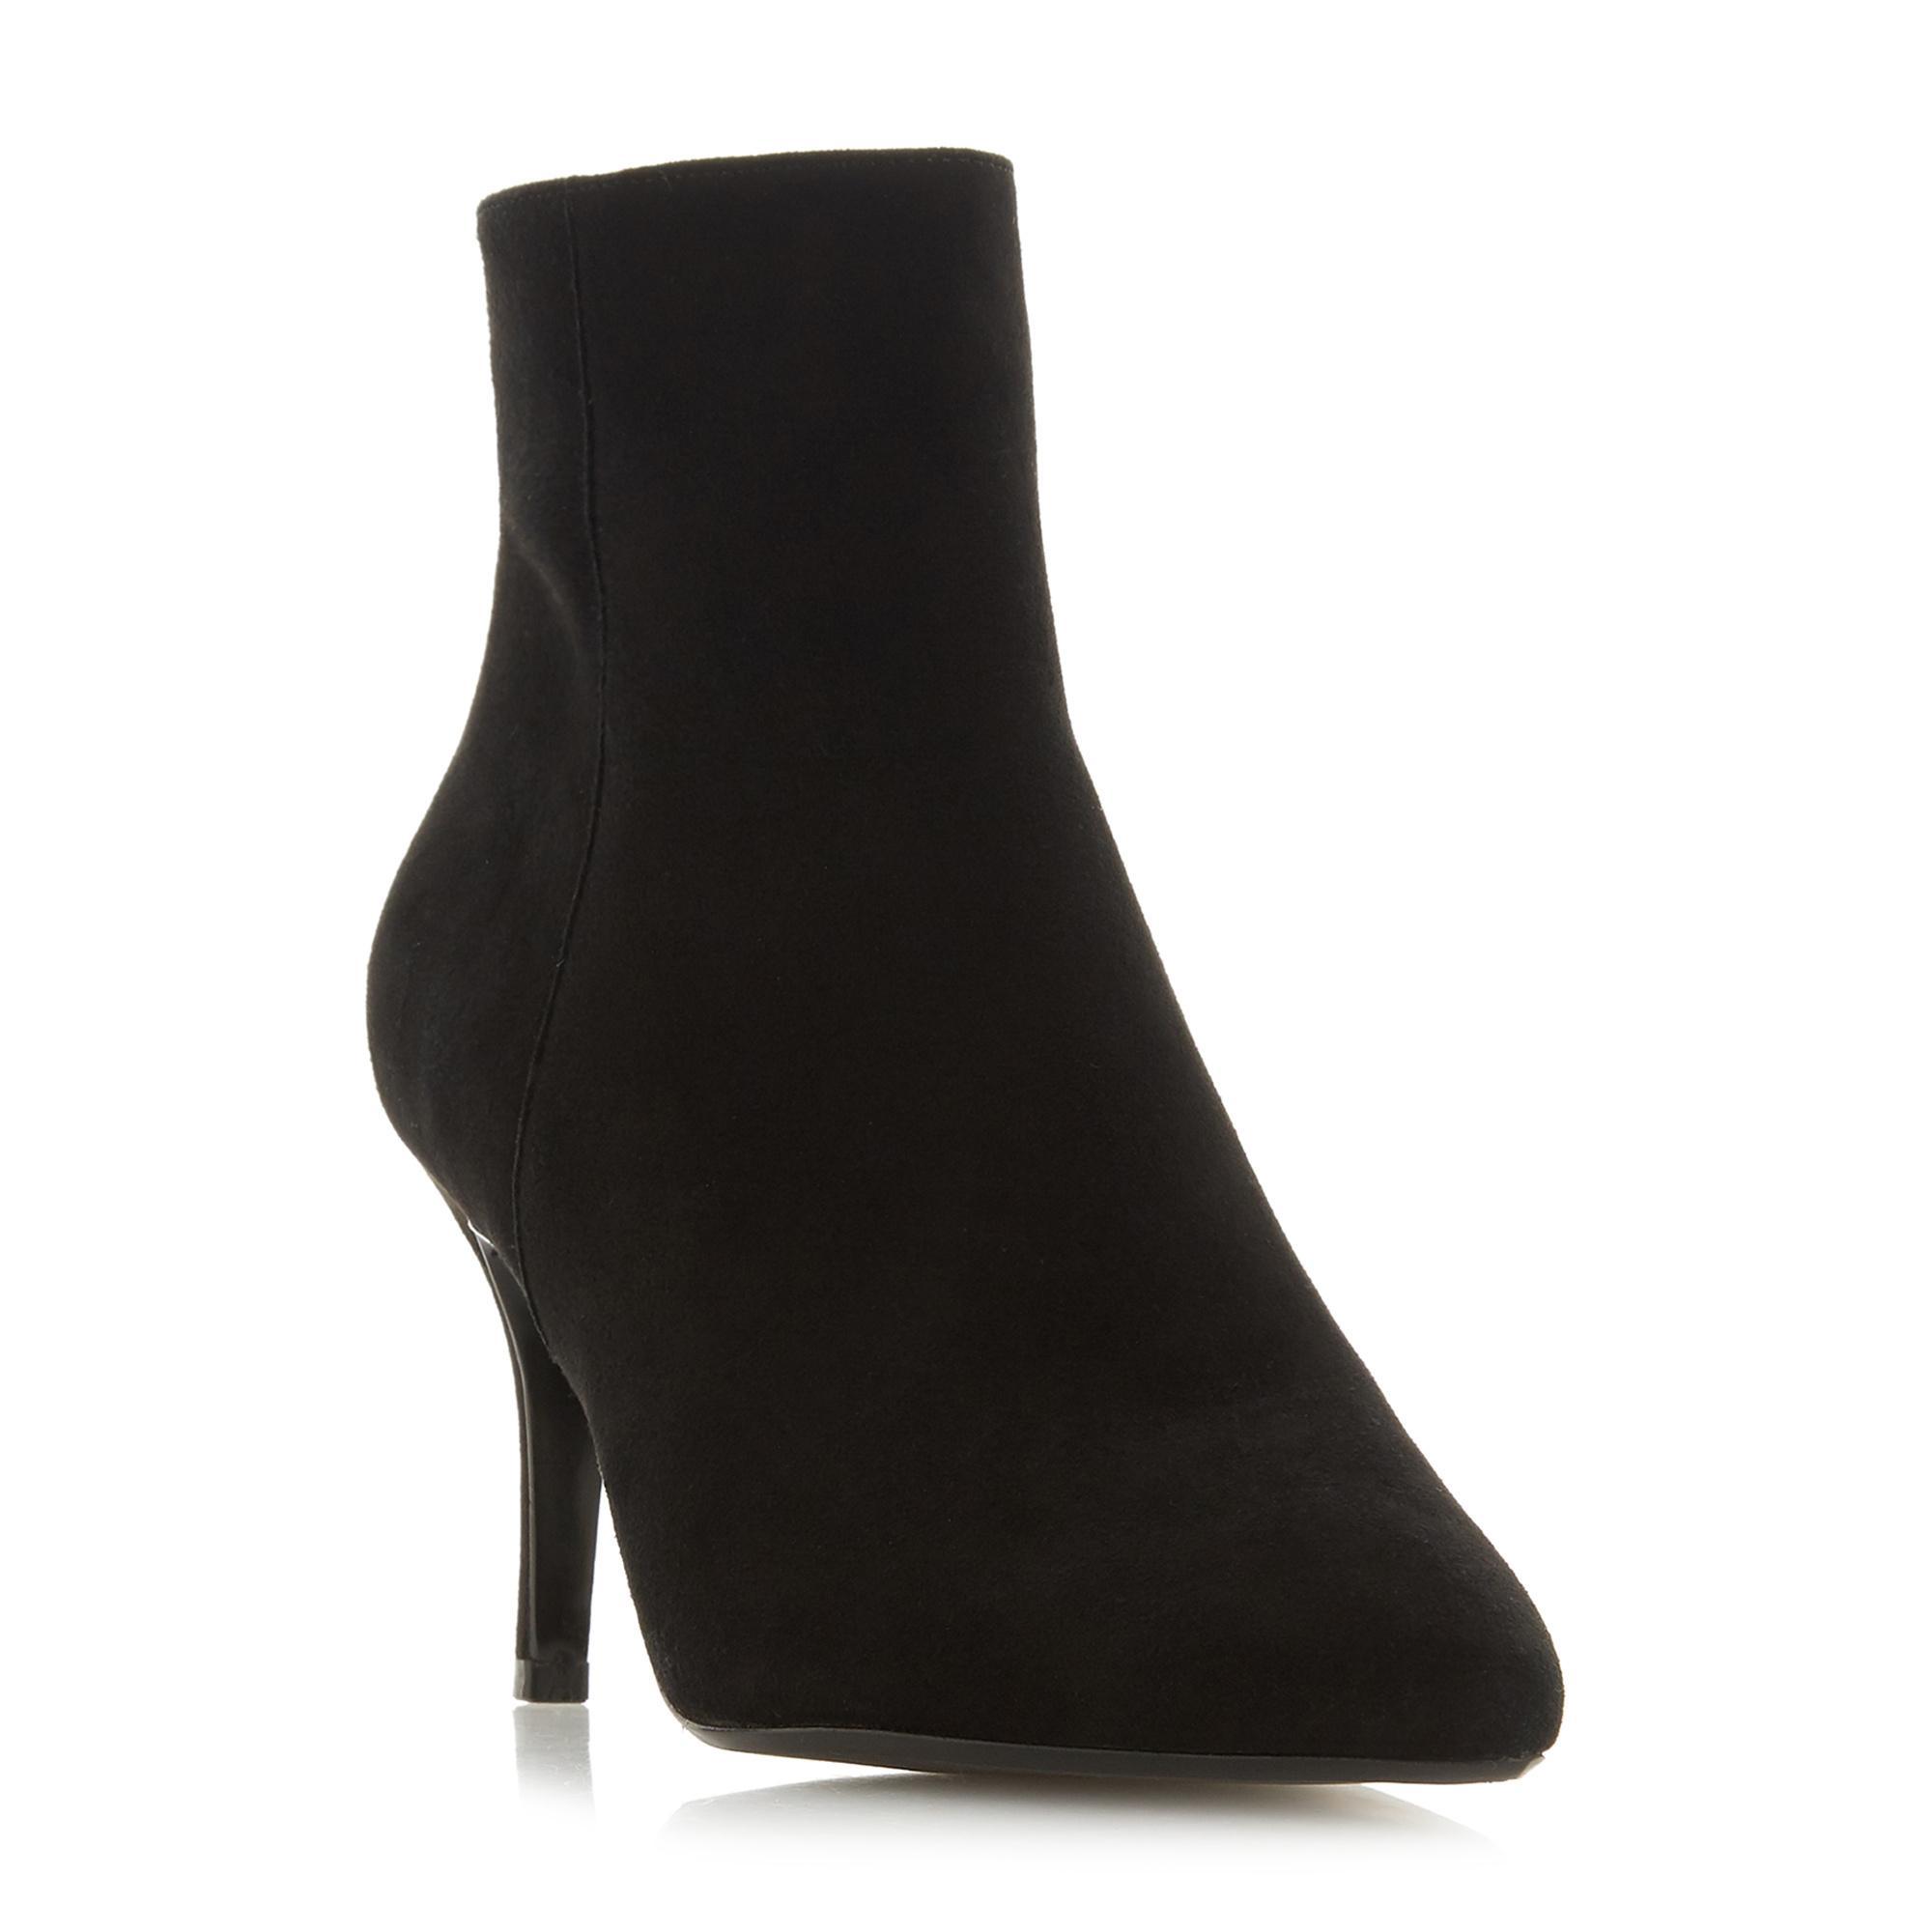 black suede mid heel ankle boots